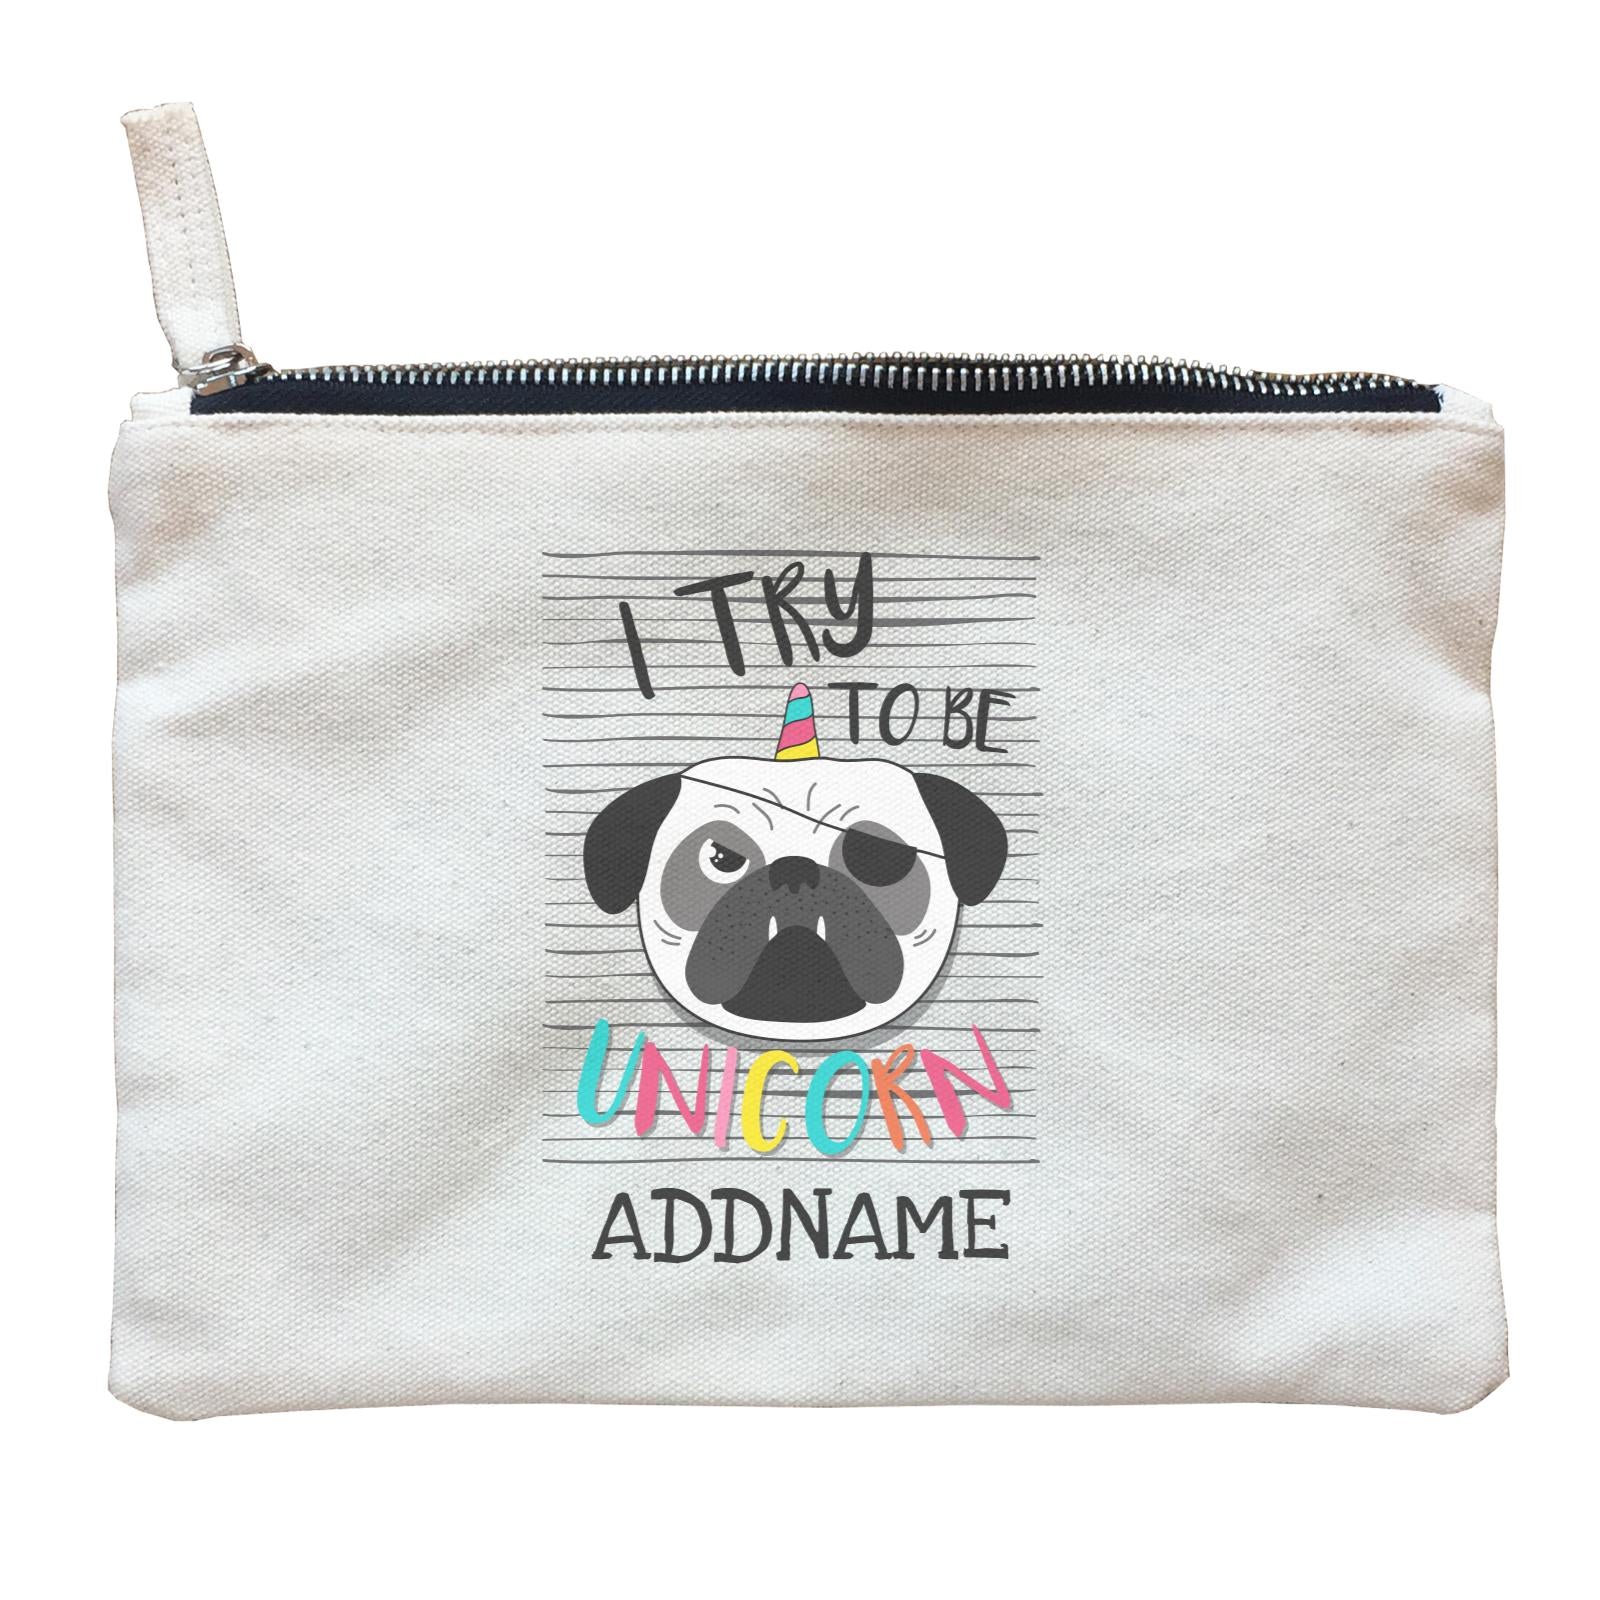 I Try to Be Unicorn Pug Addname Zipper Pouch